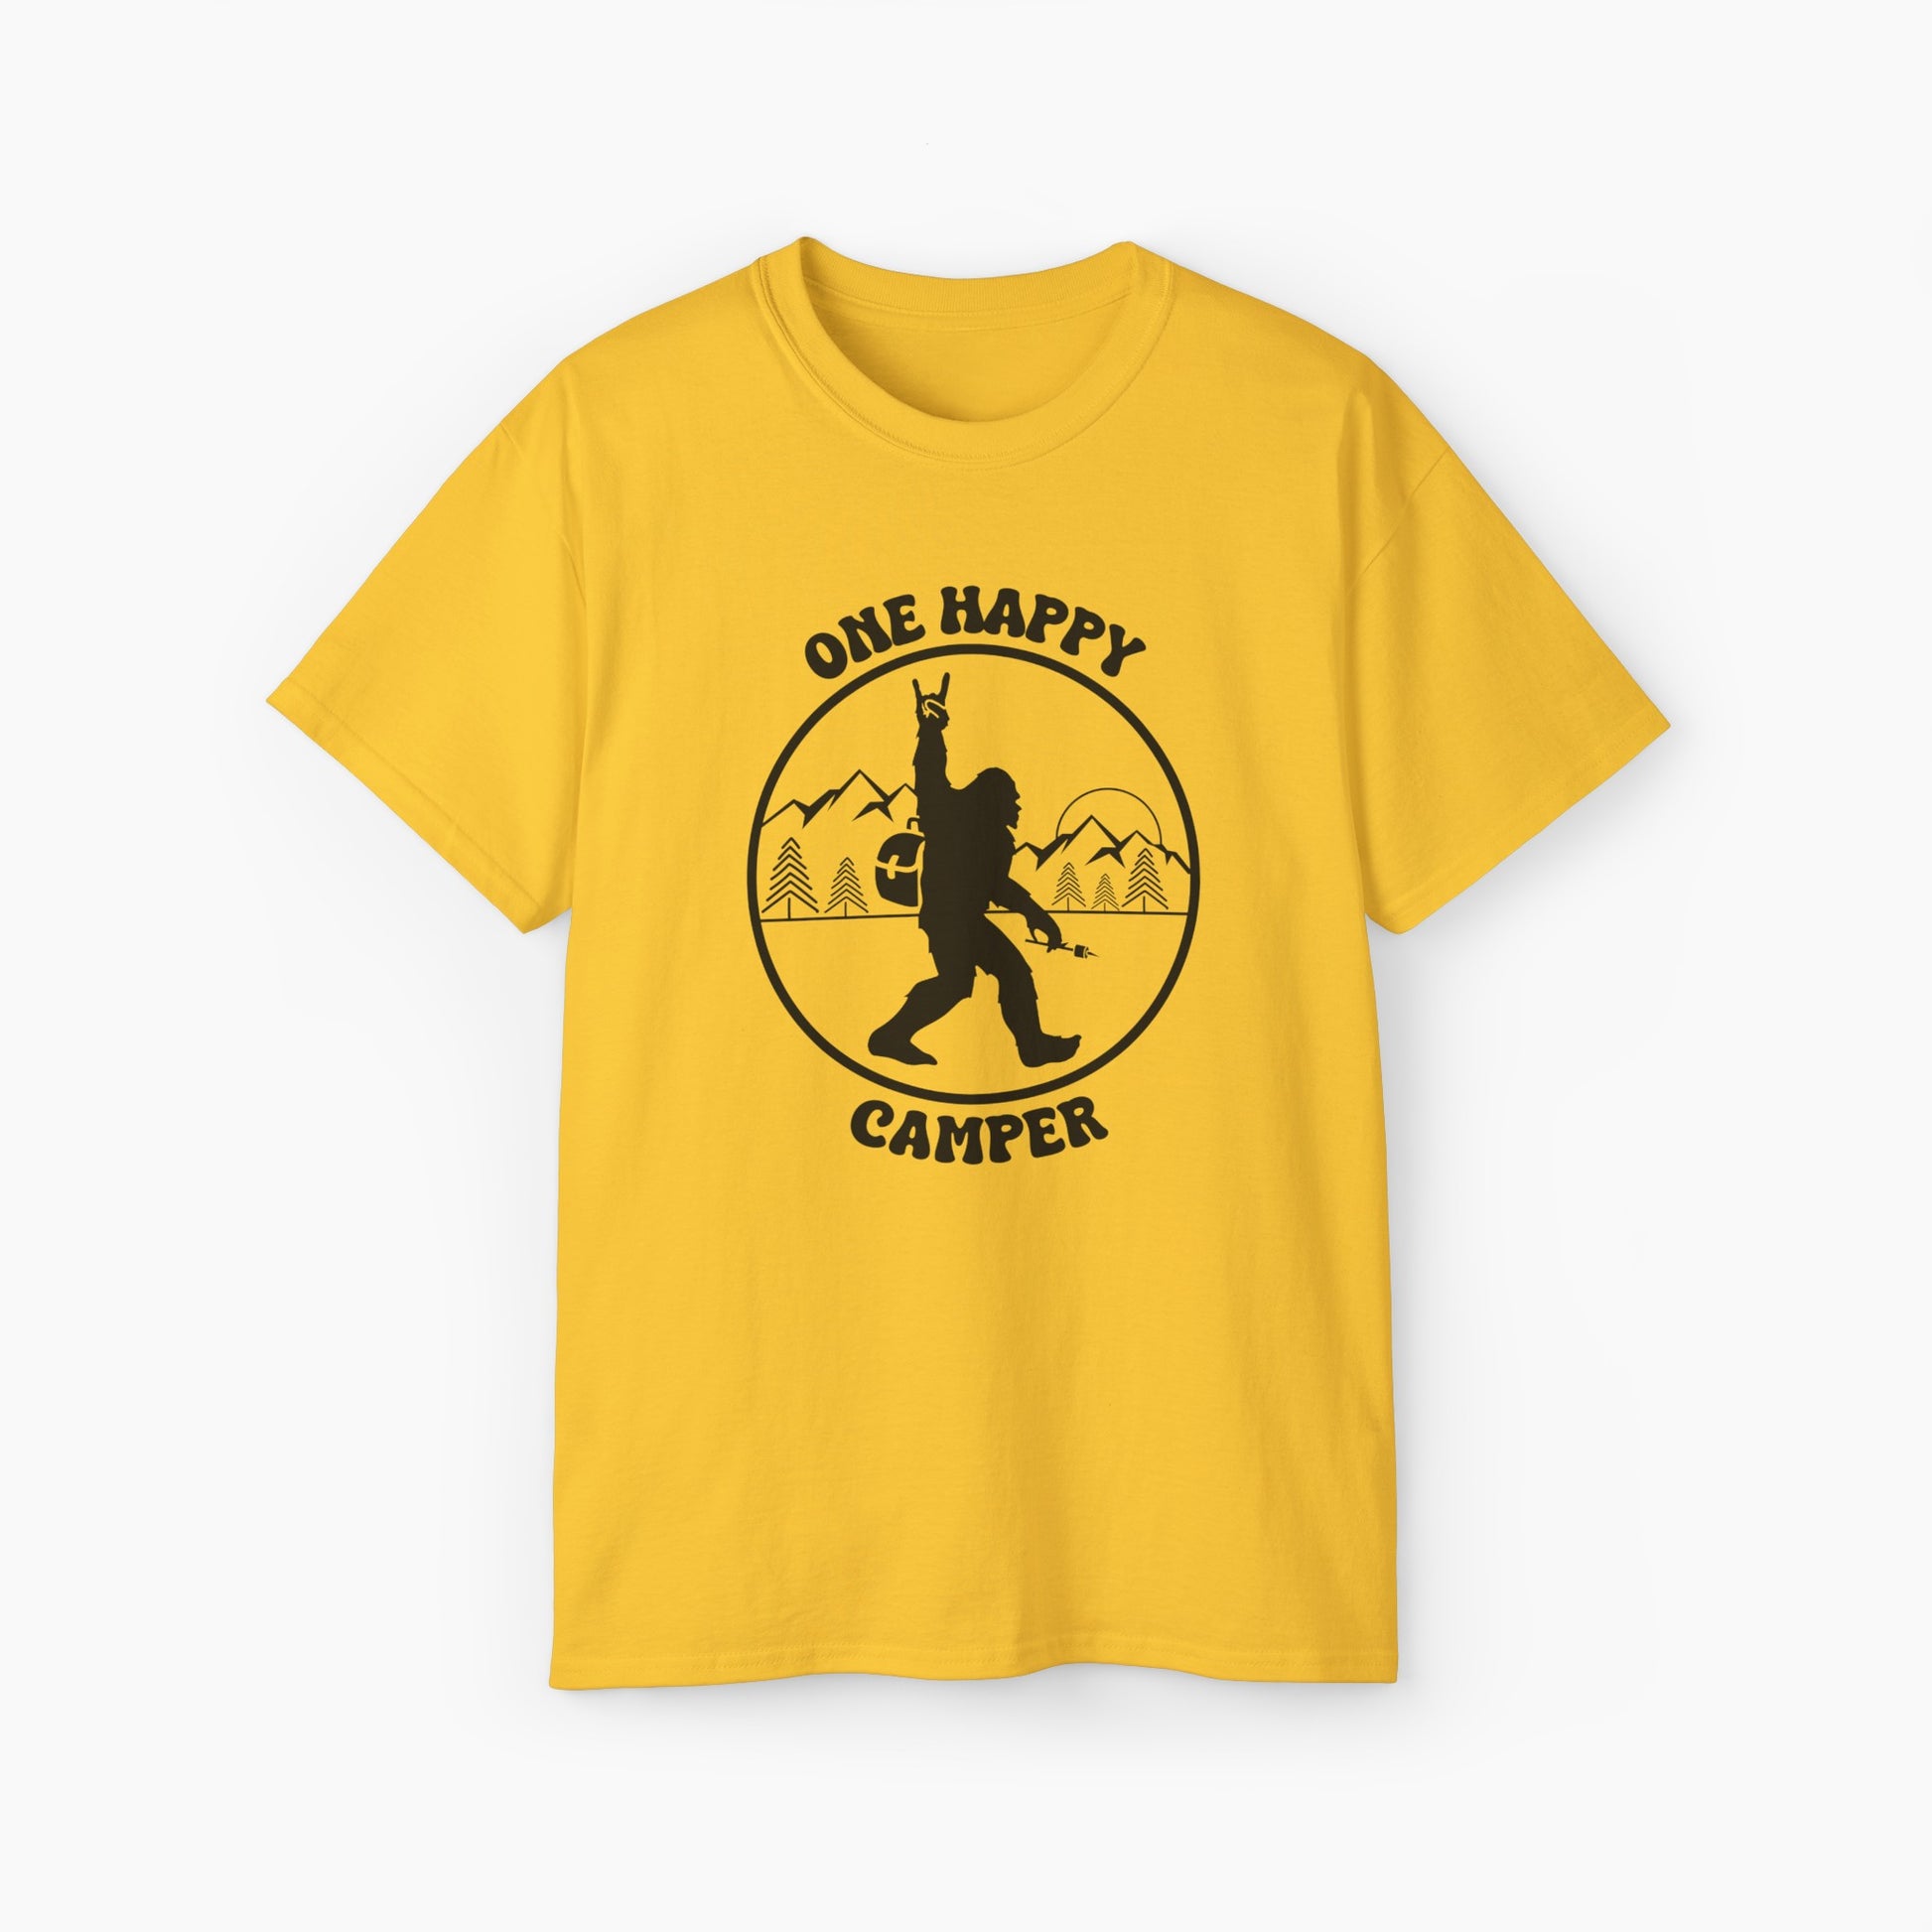 Yellow t-shirt with 'One Happy Camper' text, featuring Bigfoot making a peace sign, set against a subtle background of trees and mountains.